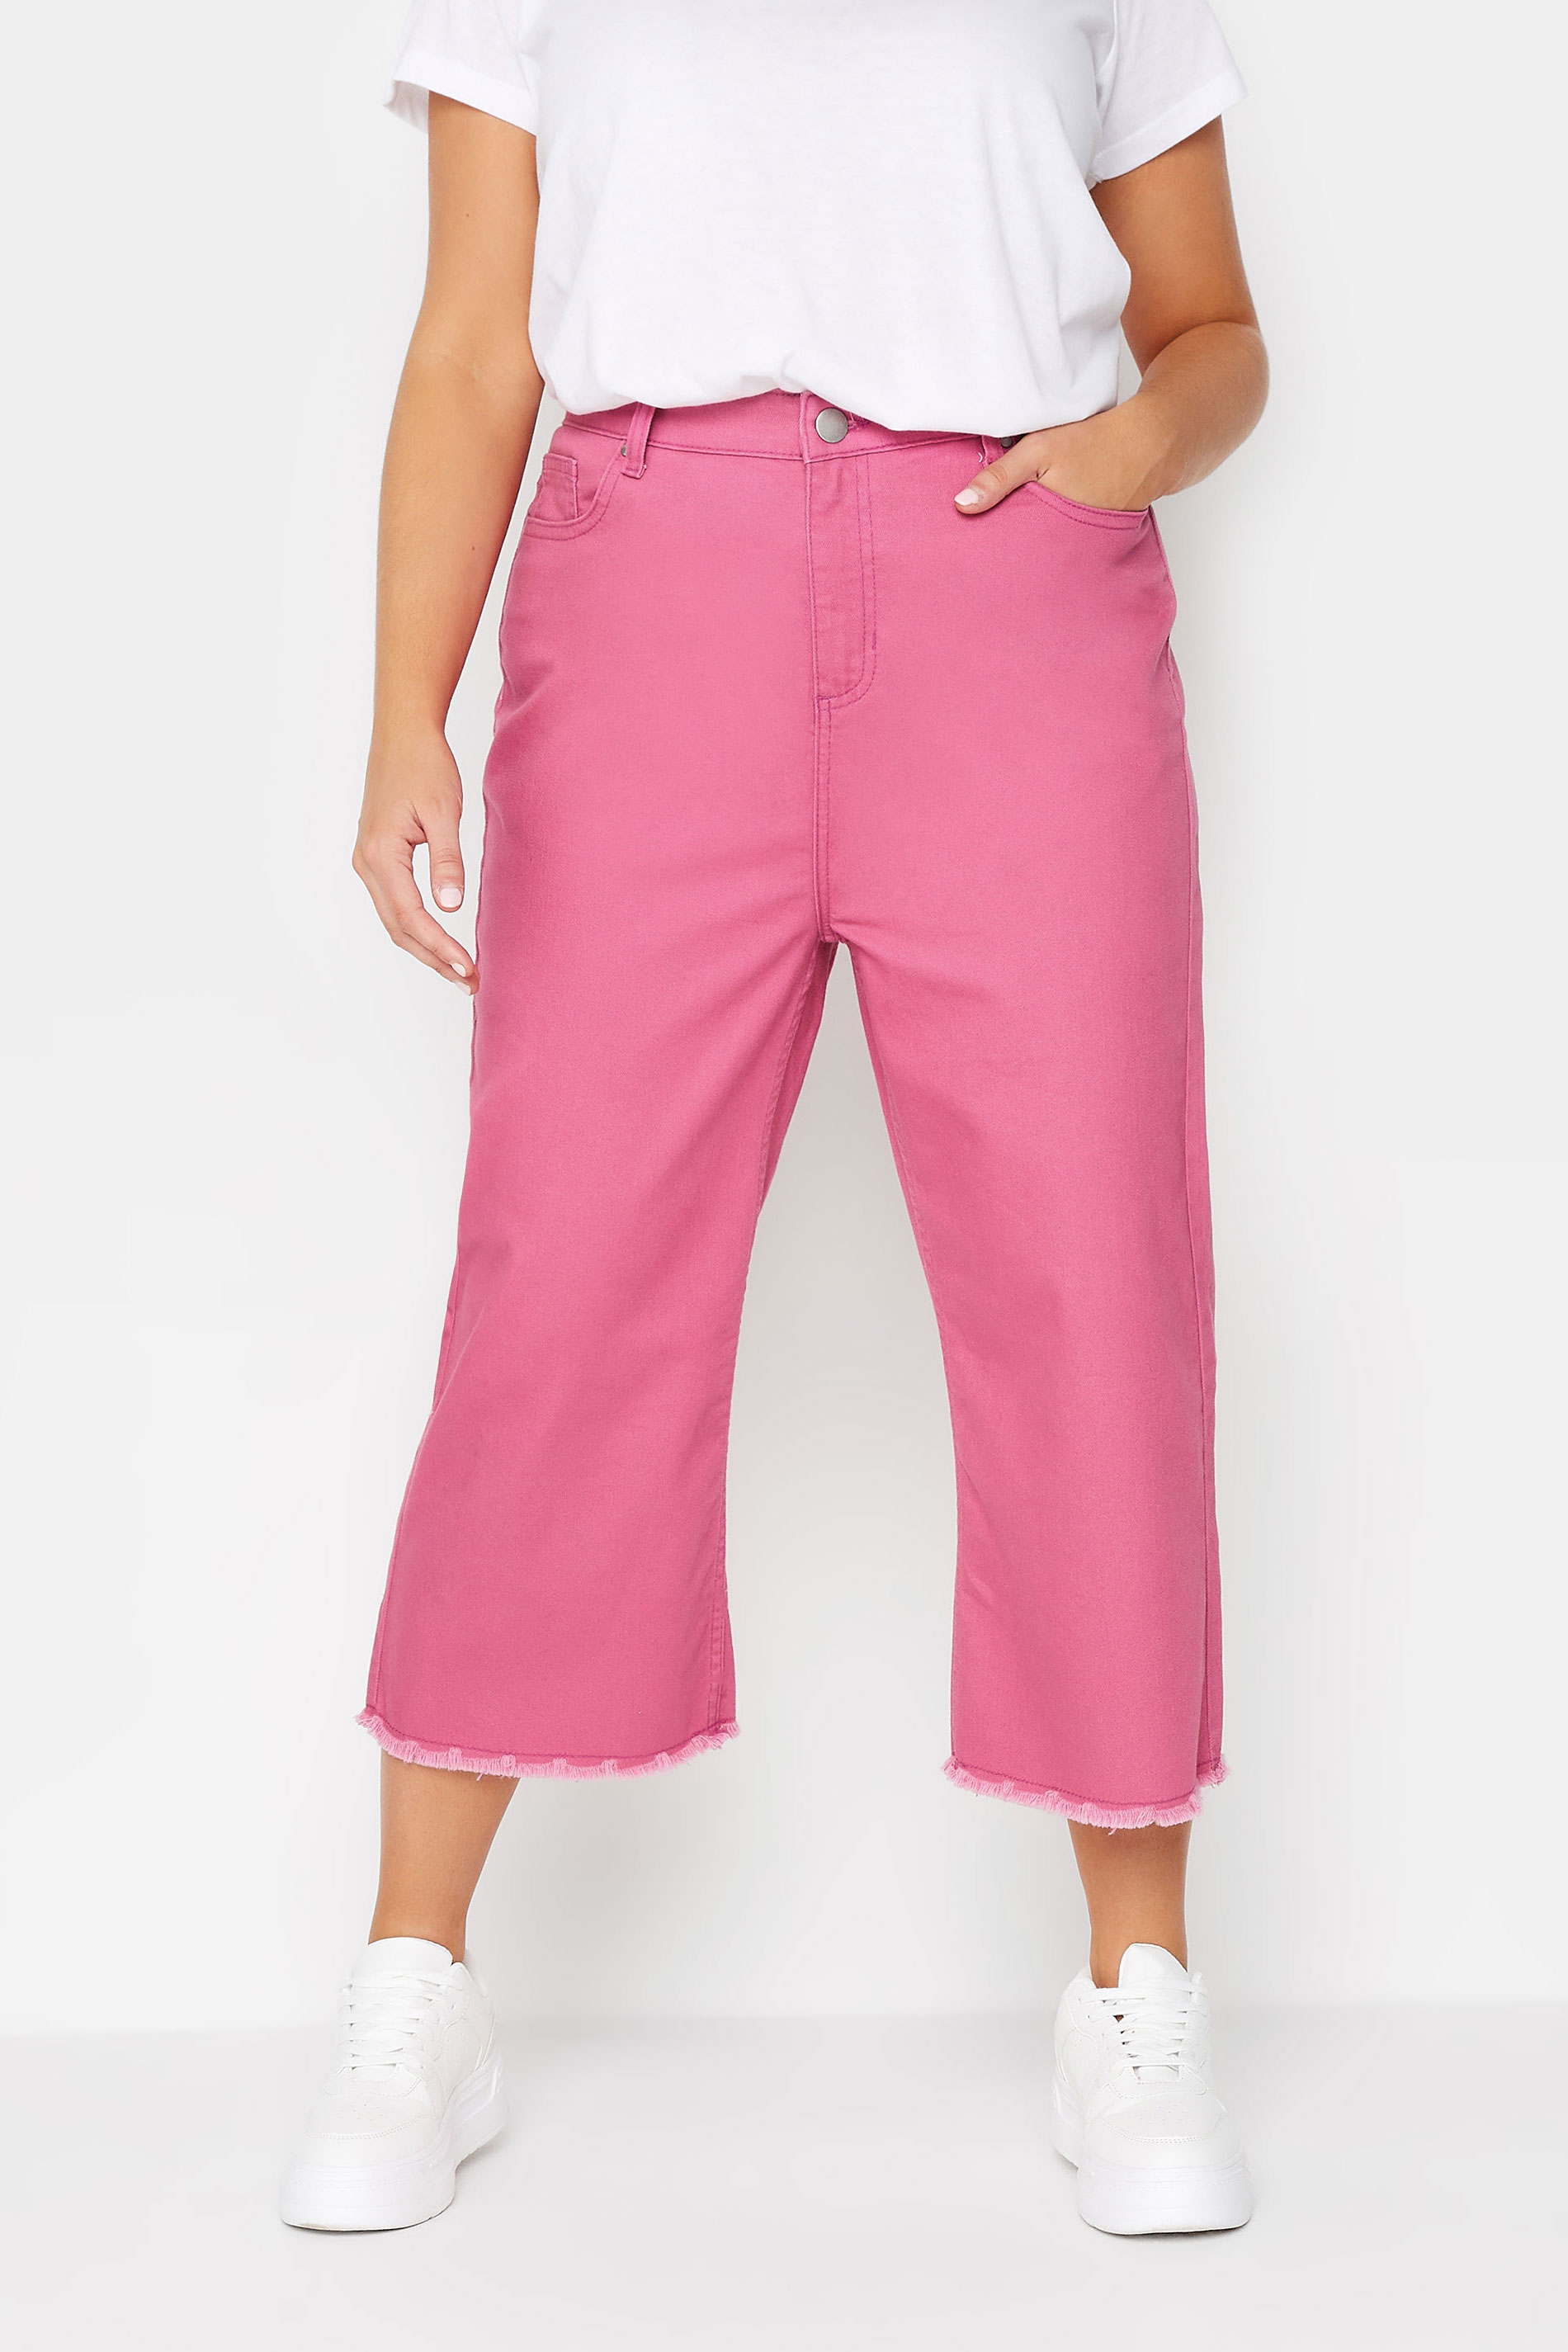 YOURS Plus Size Curve Hot Pink Stretch Cropped Jeans | Yours Clothing  2